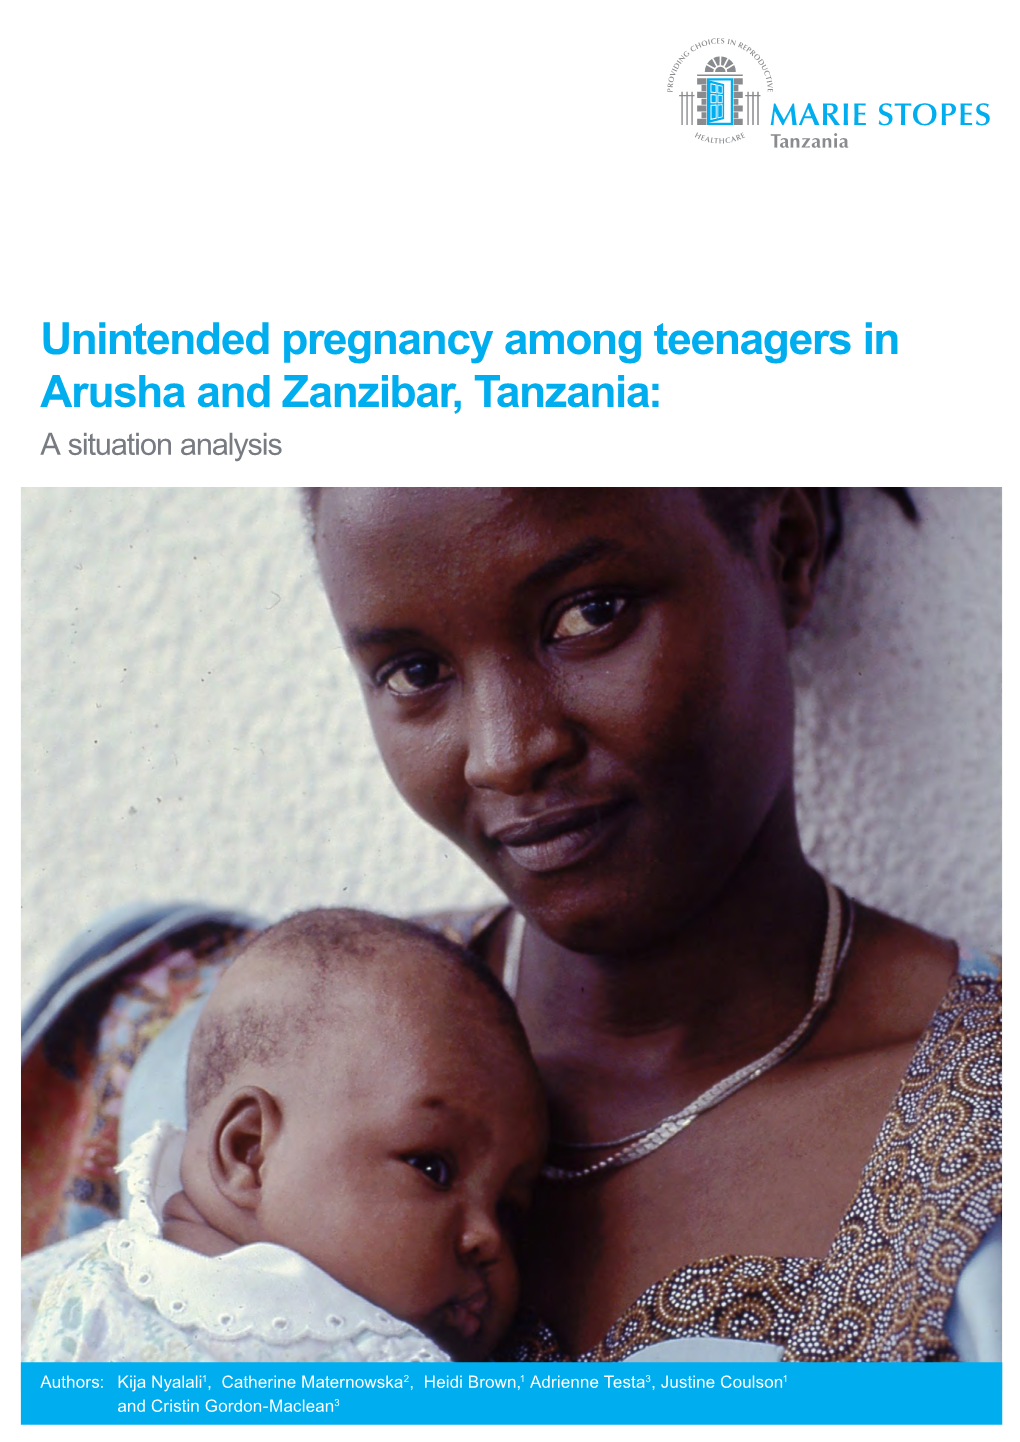 Unintended Pregnancy Among Teenagers in Arusha and Zanzibar, Tanzania: a Situation Analysis